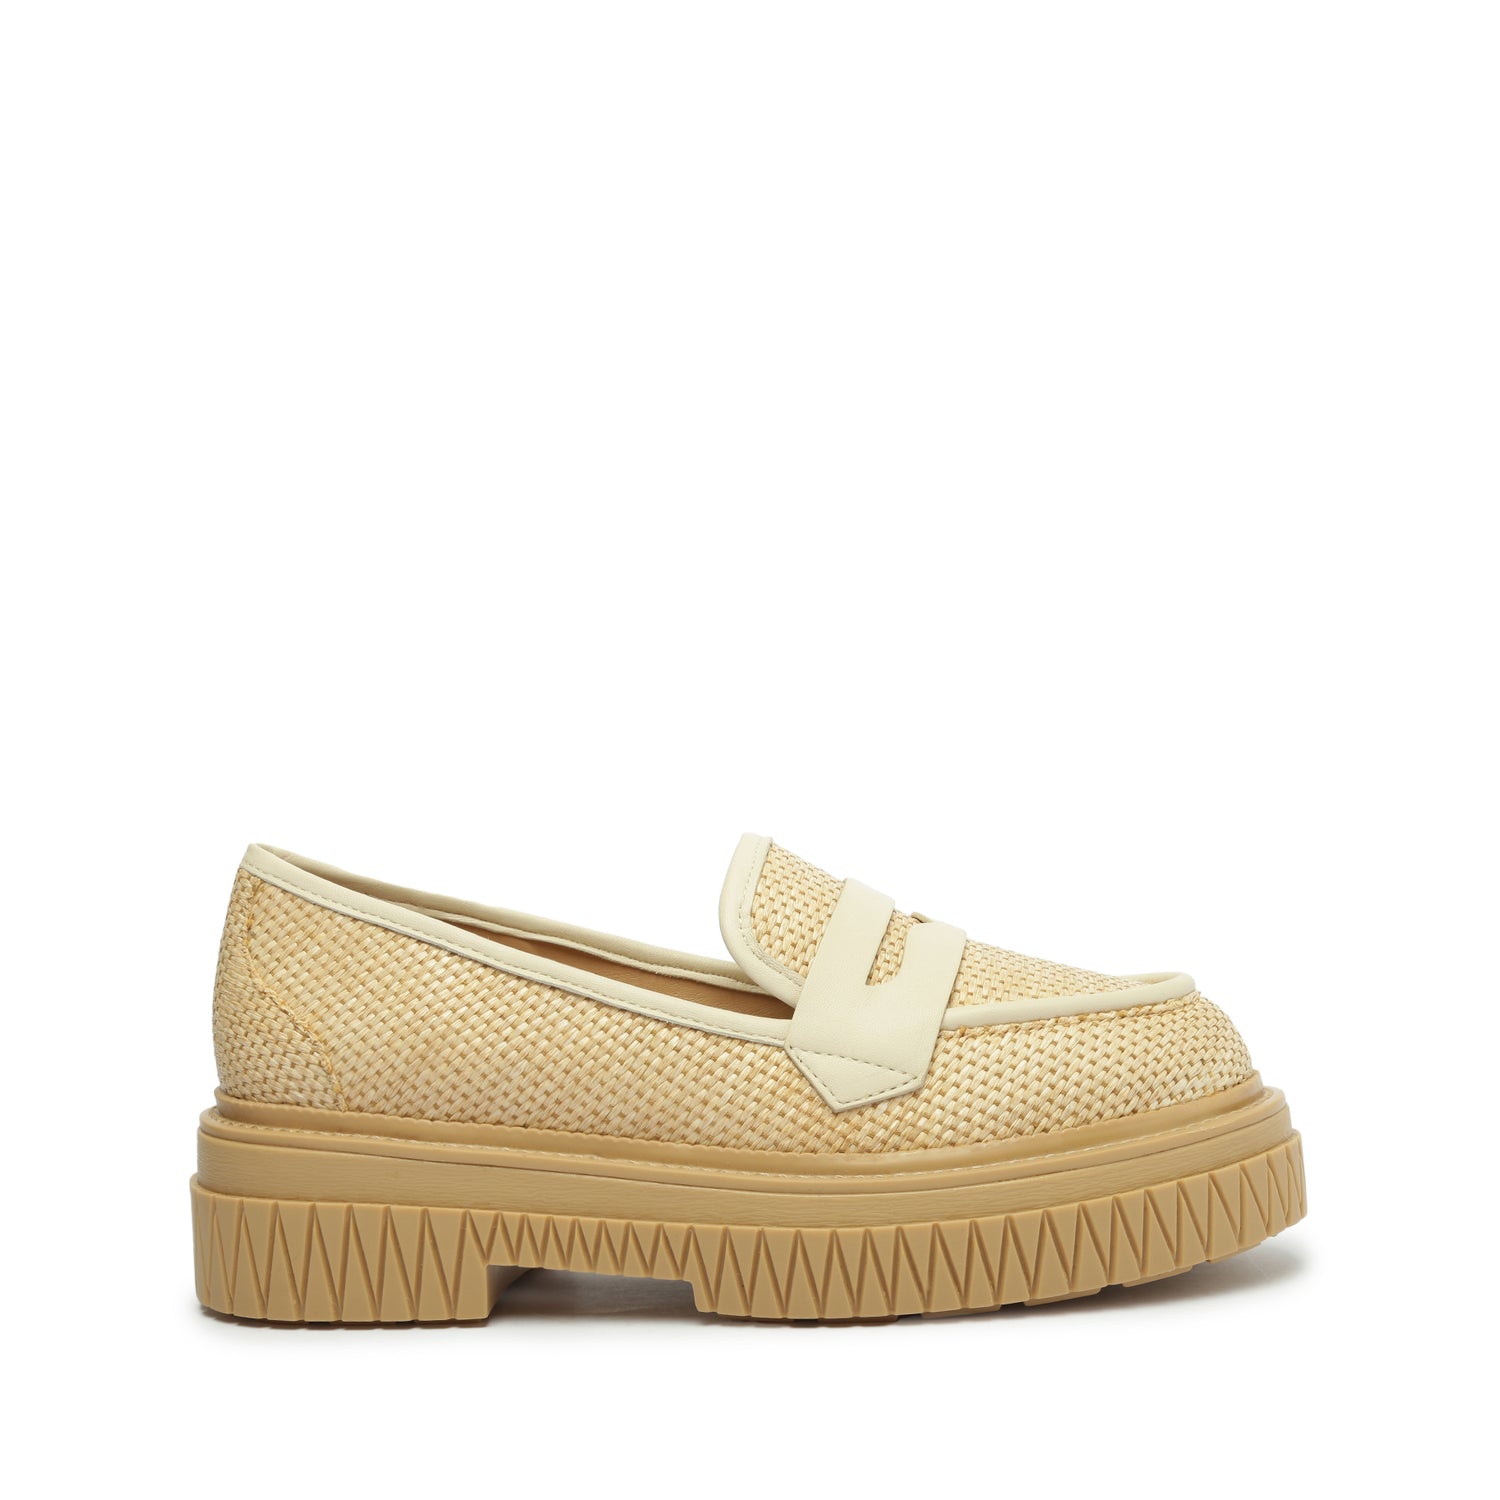 Viola Weekend Nappa Leather Flat Flats OLD 5 Off White Nappa Leather - Schutz Shoes